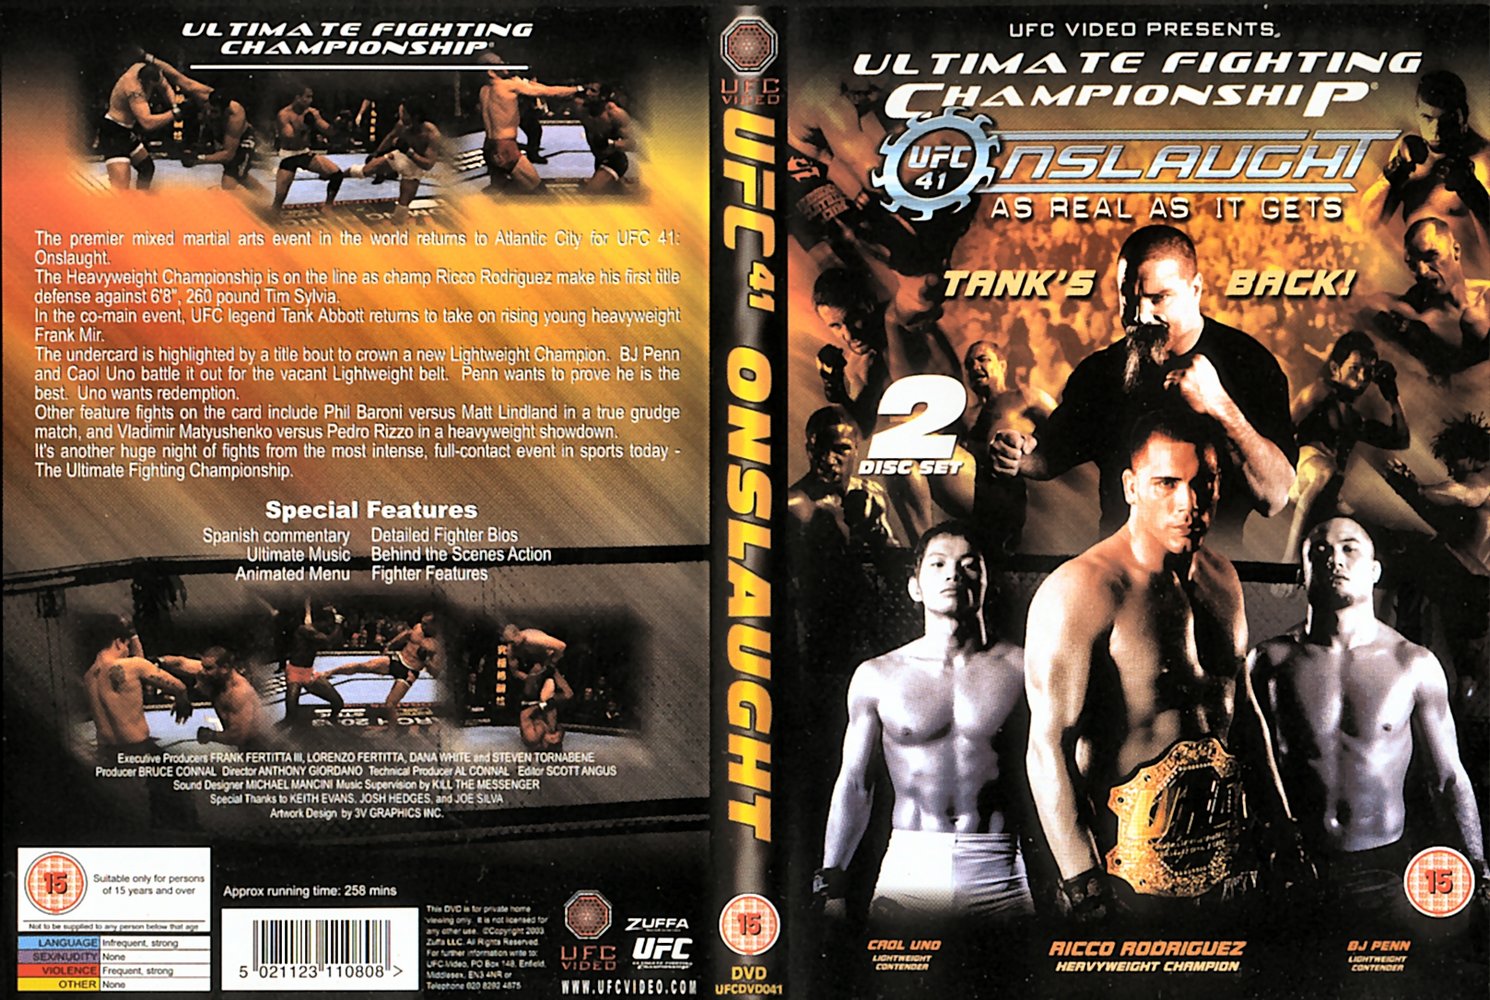 Jaquette DVD Ufc 41 onslaught